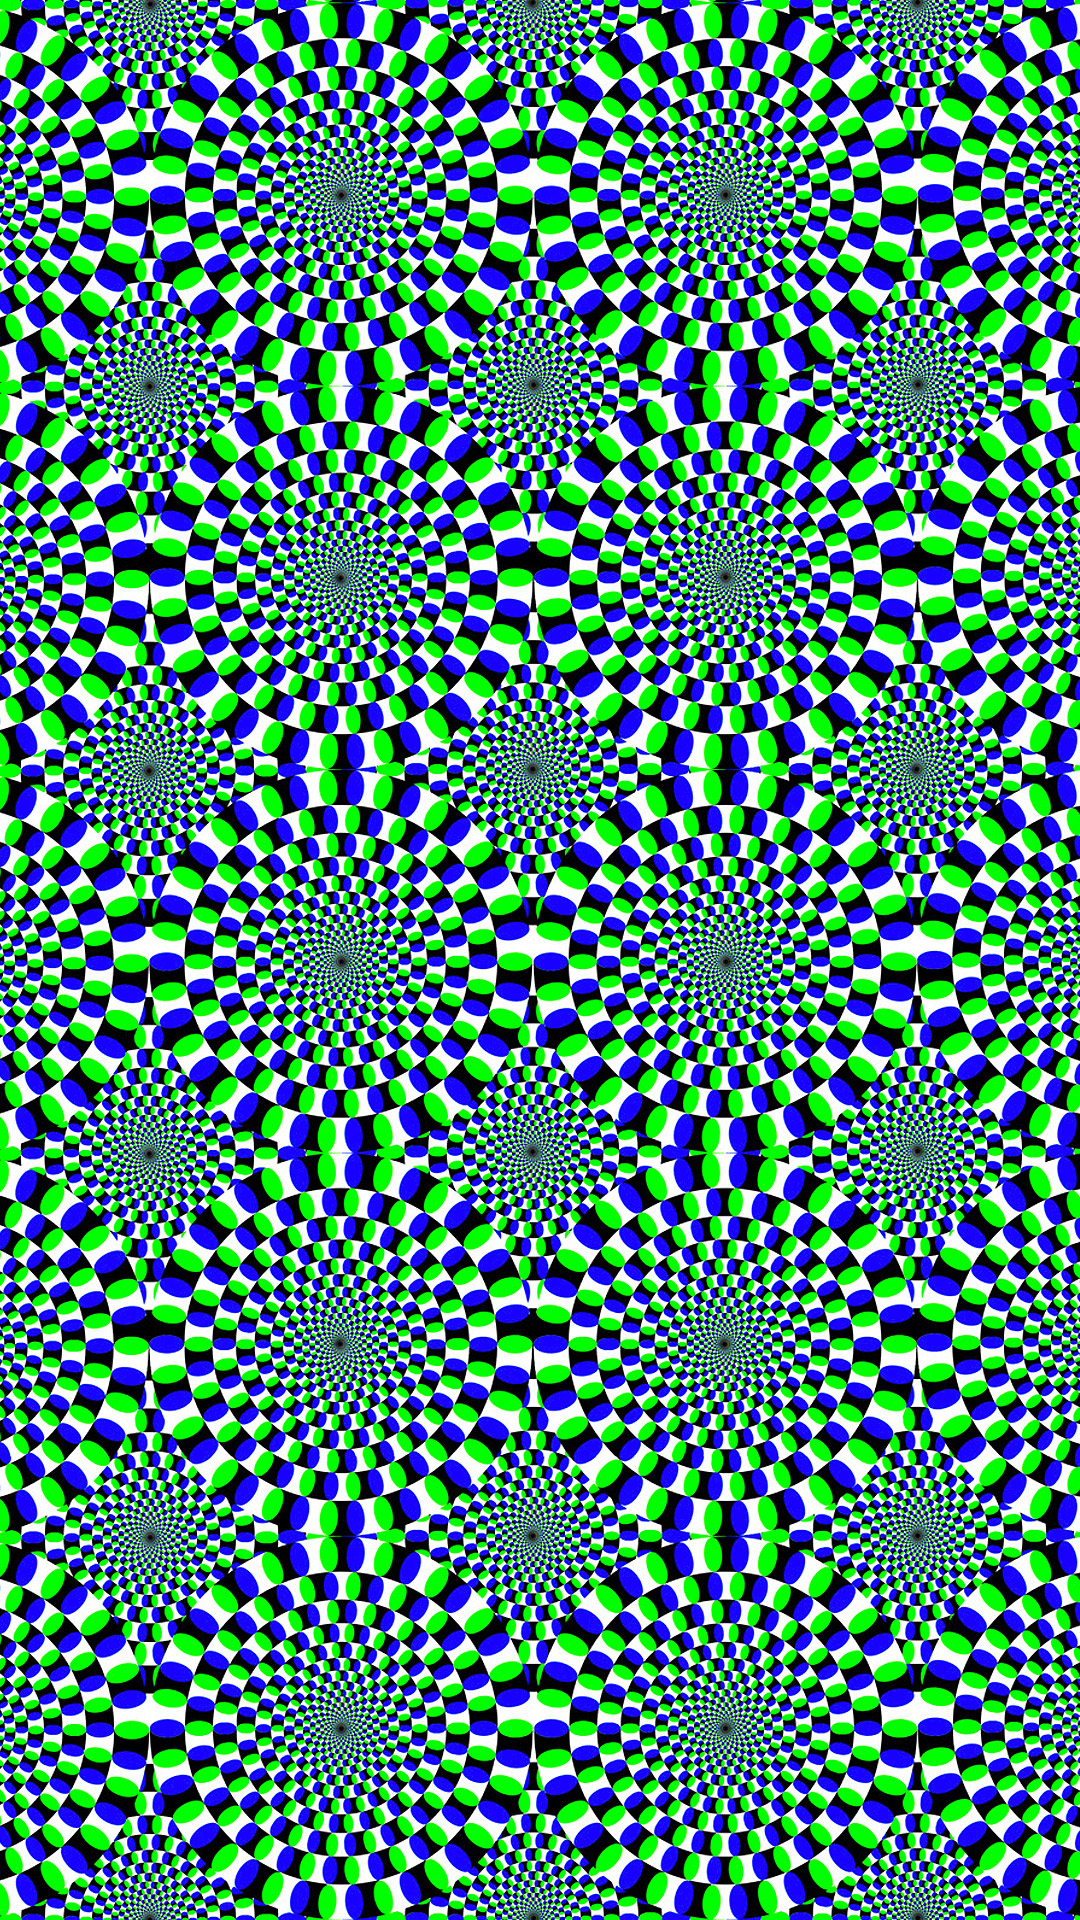 1080x1920 Trippy Optical Illusions That Appear to be Animated (Use as Phone Wallpaper if You Want to go Crazy) &acirc;&#128;&#147; BOOOOOOOM! &acirc;&#128;&#147; CREATE * INSPIRE * COMMUNITY * ART * DESIGN * MUSIC * FILM * PHOTO * PROJECTS